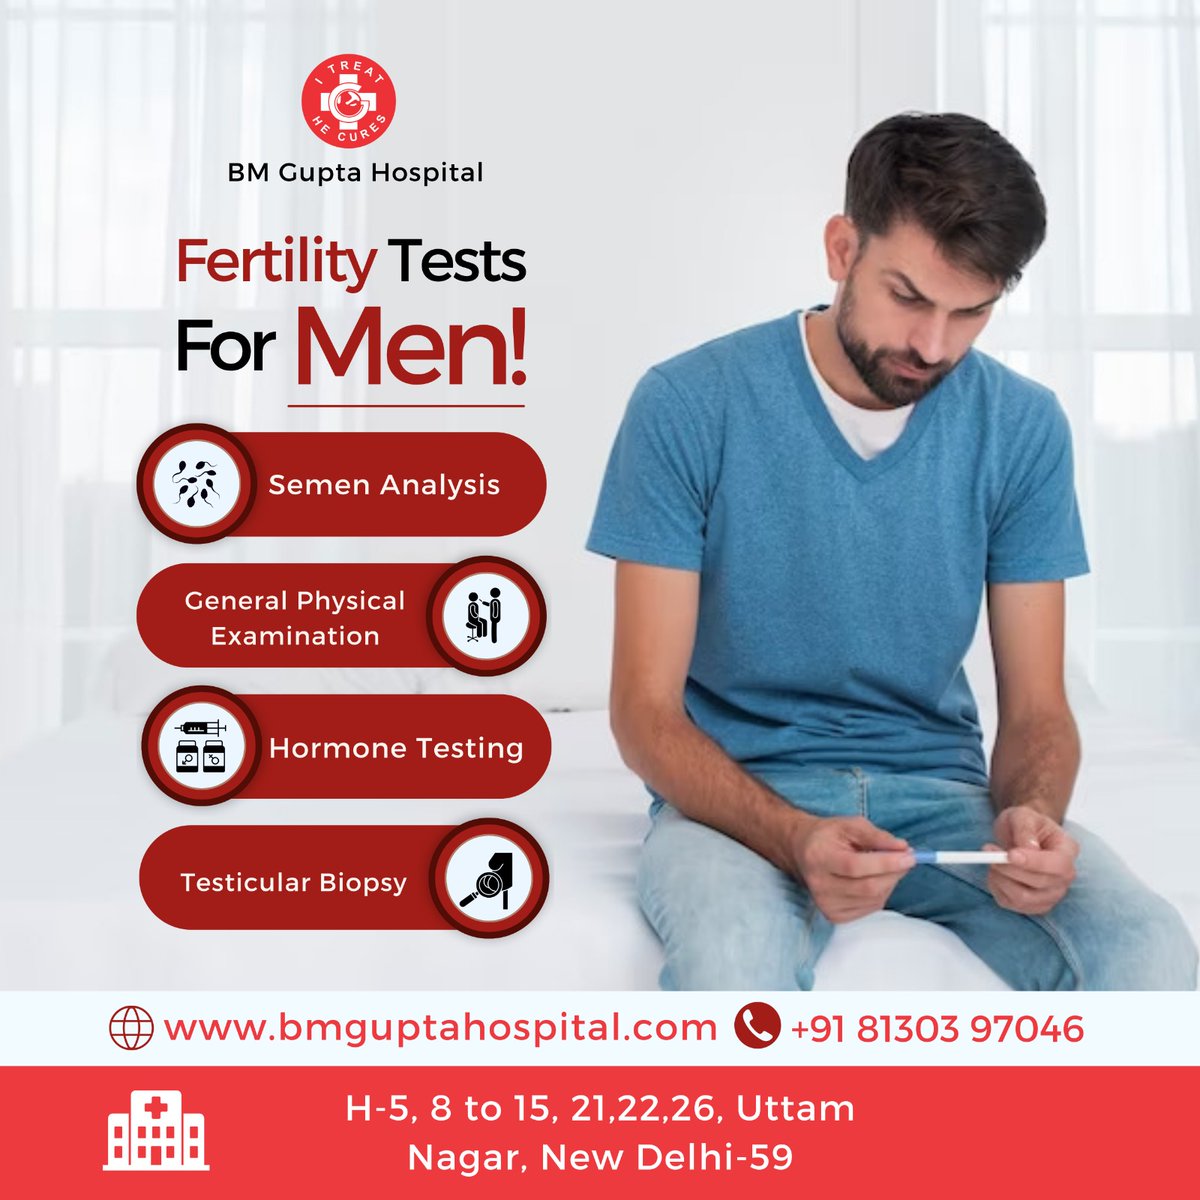 Fertility tests for men involve semen analysis to assess sperm count, motility, and morphology, aiding in diagnosing potential infertility issues. #healthcare #MaleFertilityTesting #SemenAnalysis #SpermCount #SpermMotility #SpermMorphology #MaleInfertility #FertilityAssessment